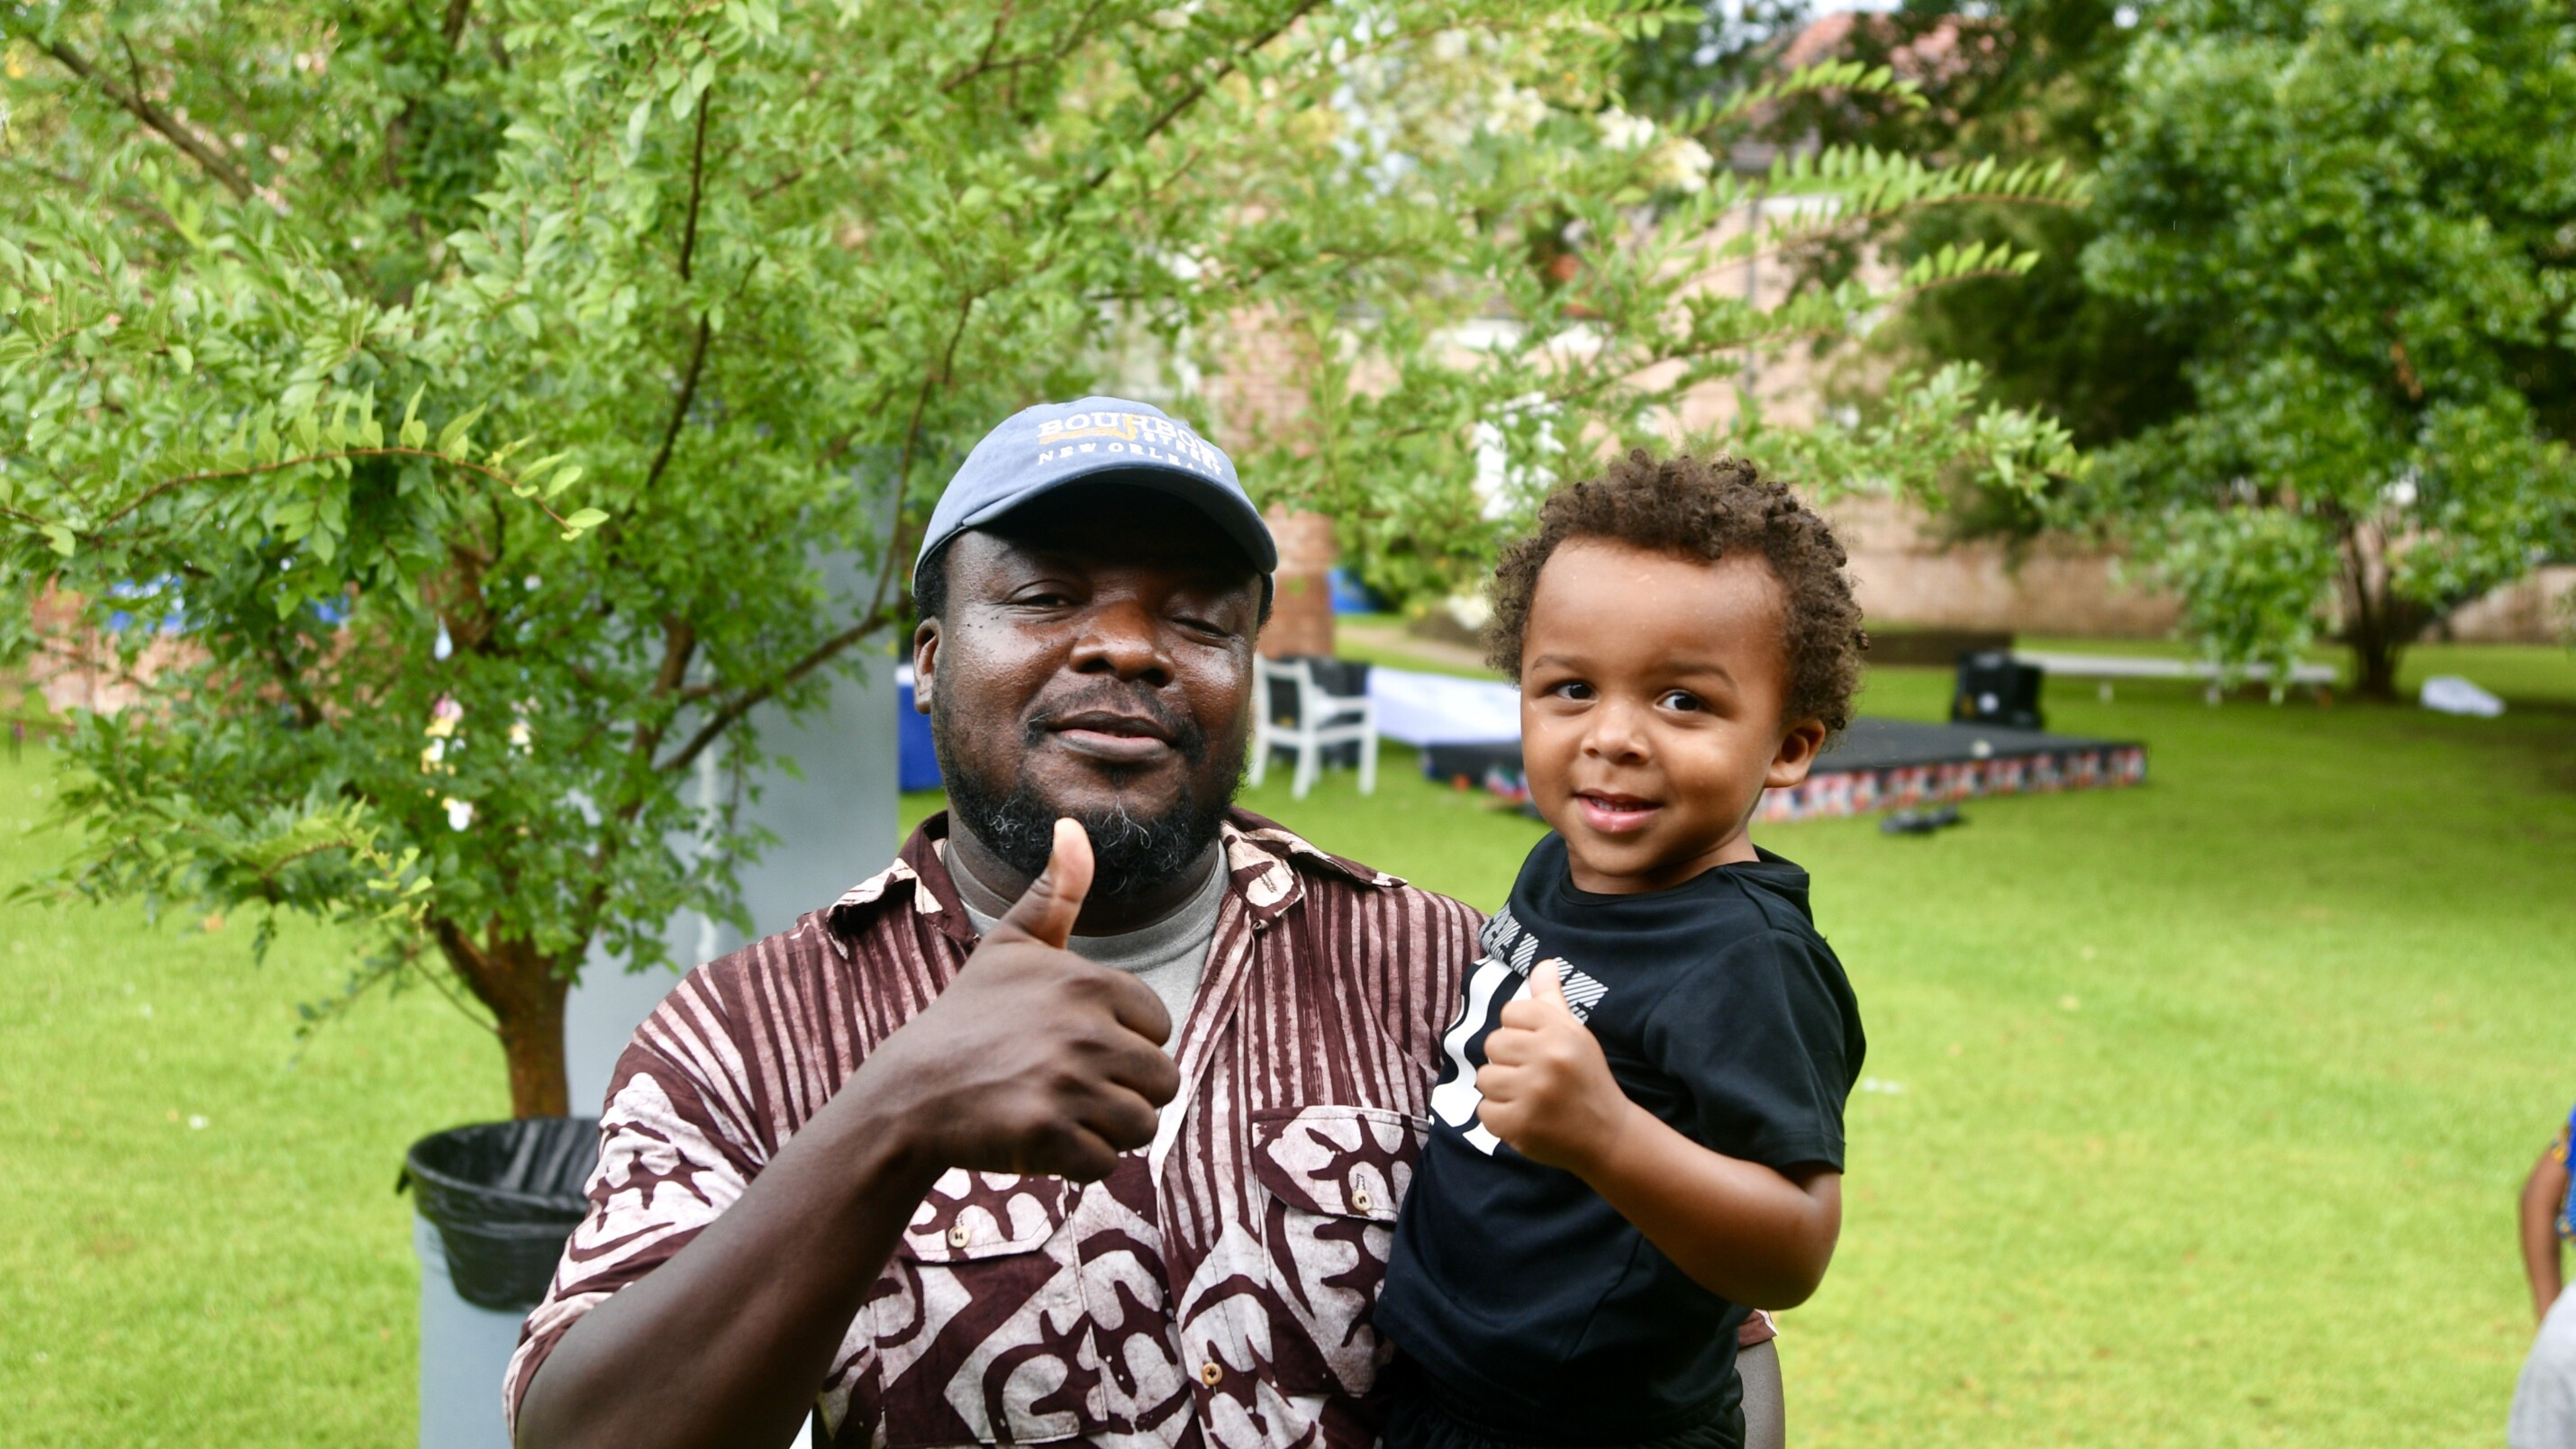 Smiling father and son. The father gives a thumbs up at the camera.